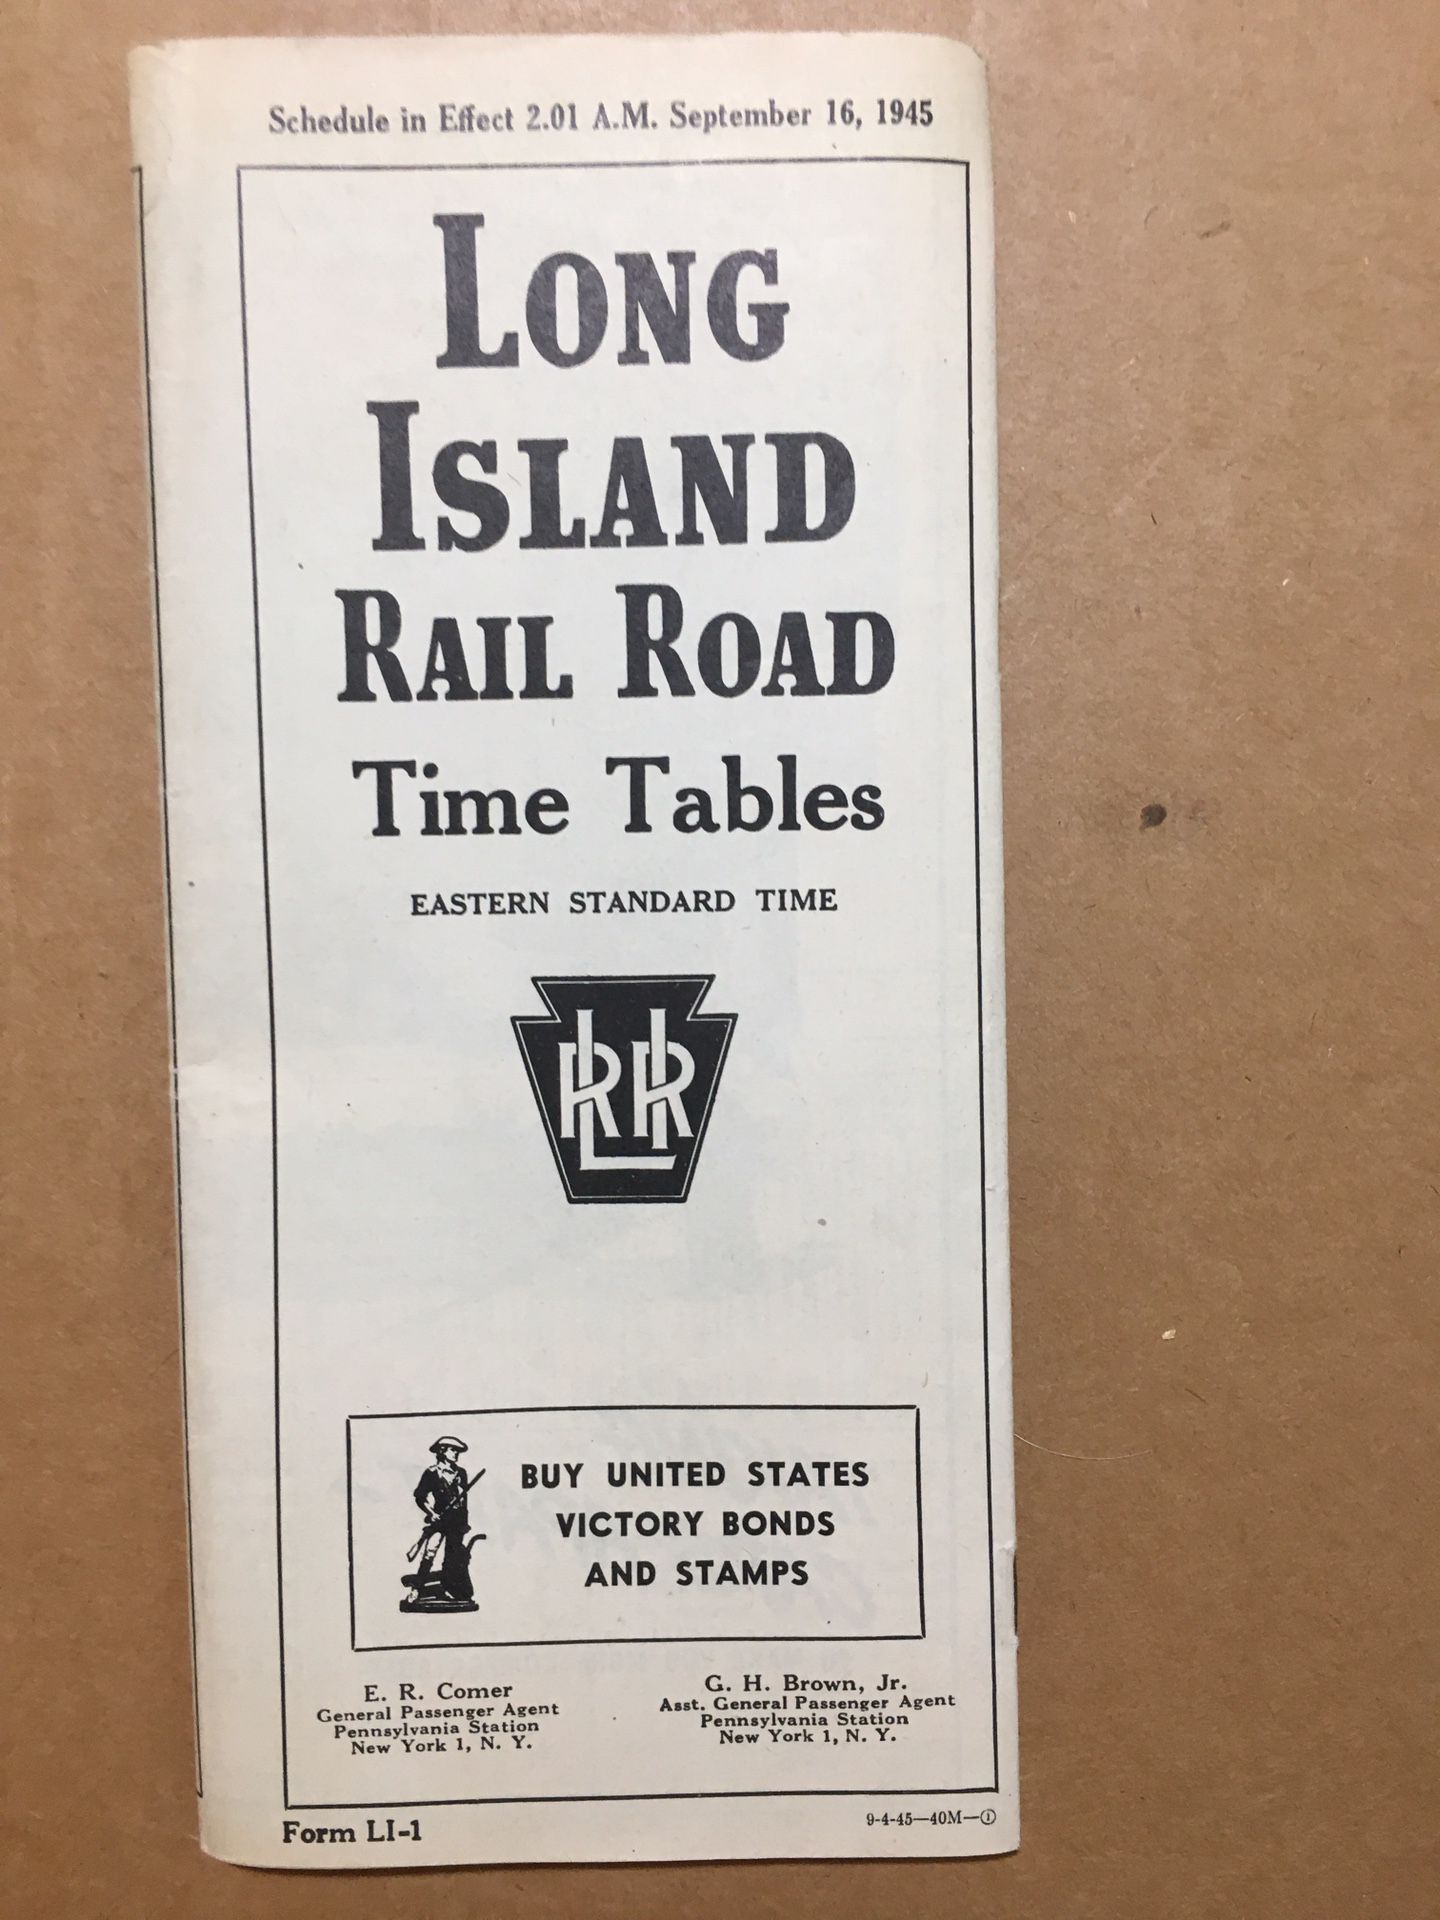 Long Island Railroad Sept 1945 System Schedule